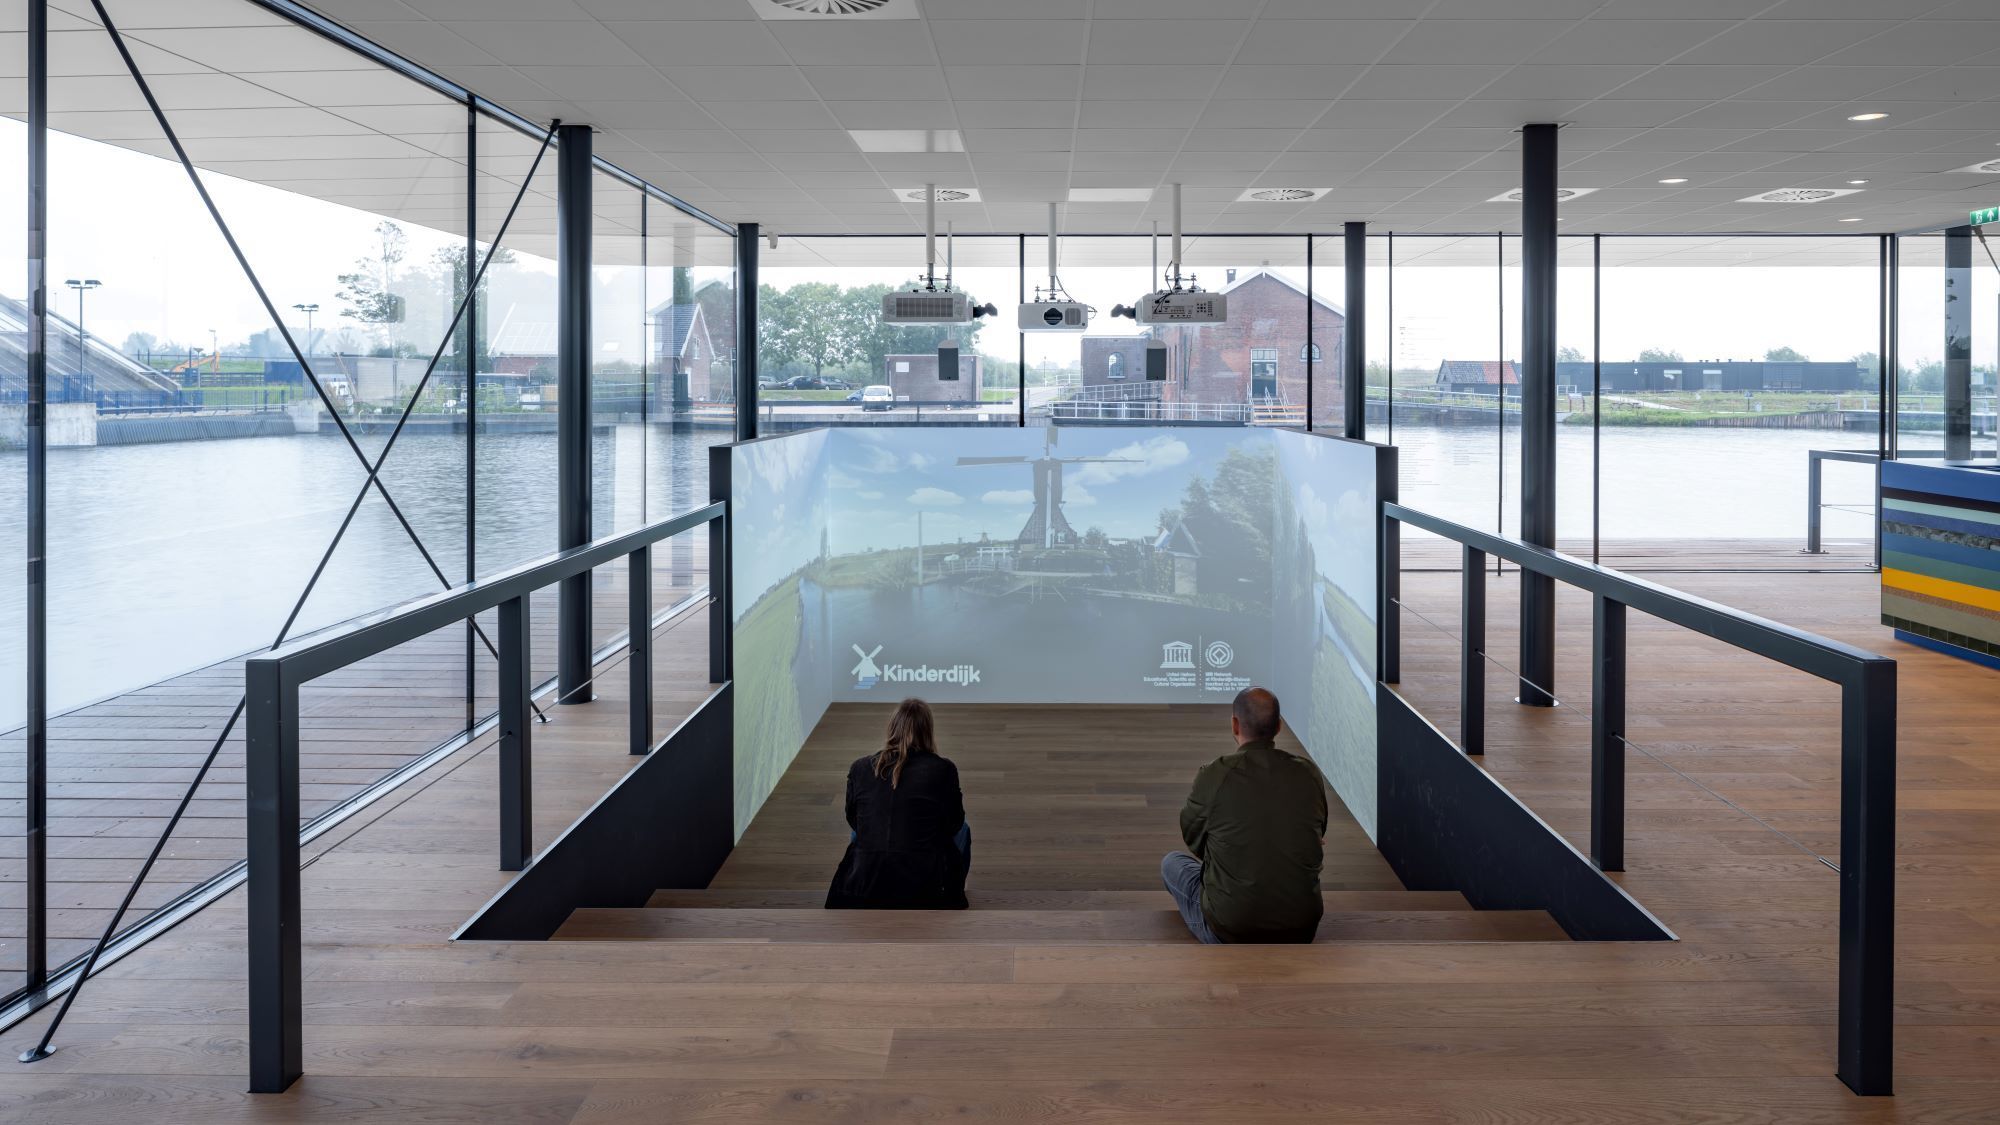 Two people enjoying the learning space at the visitor centre of Kinderdijk